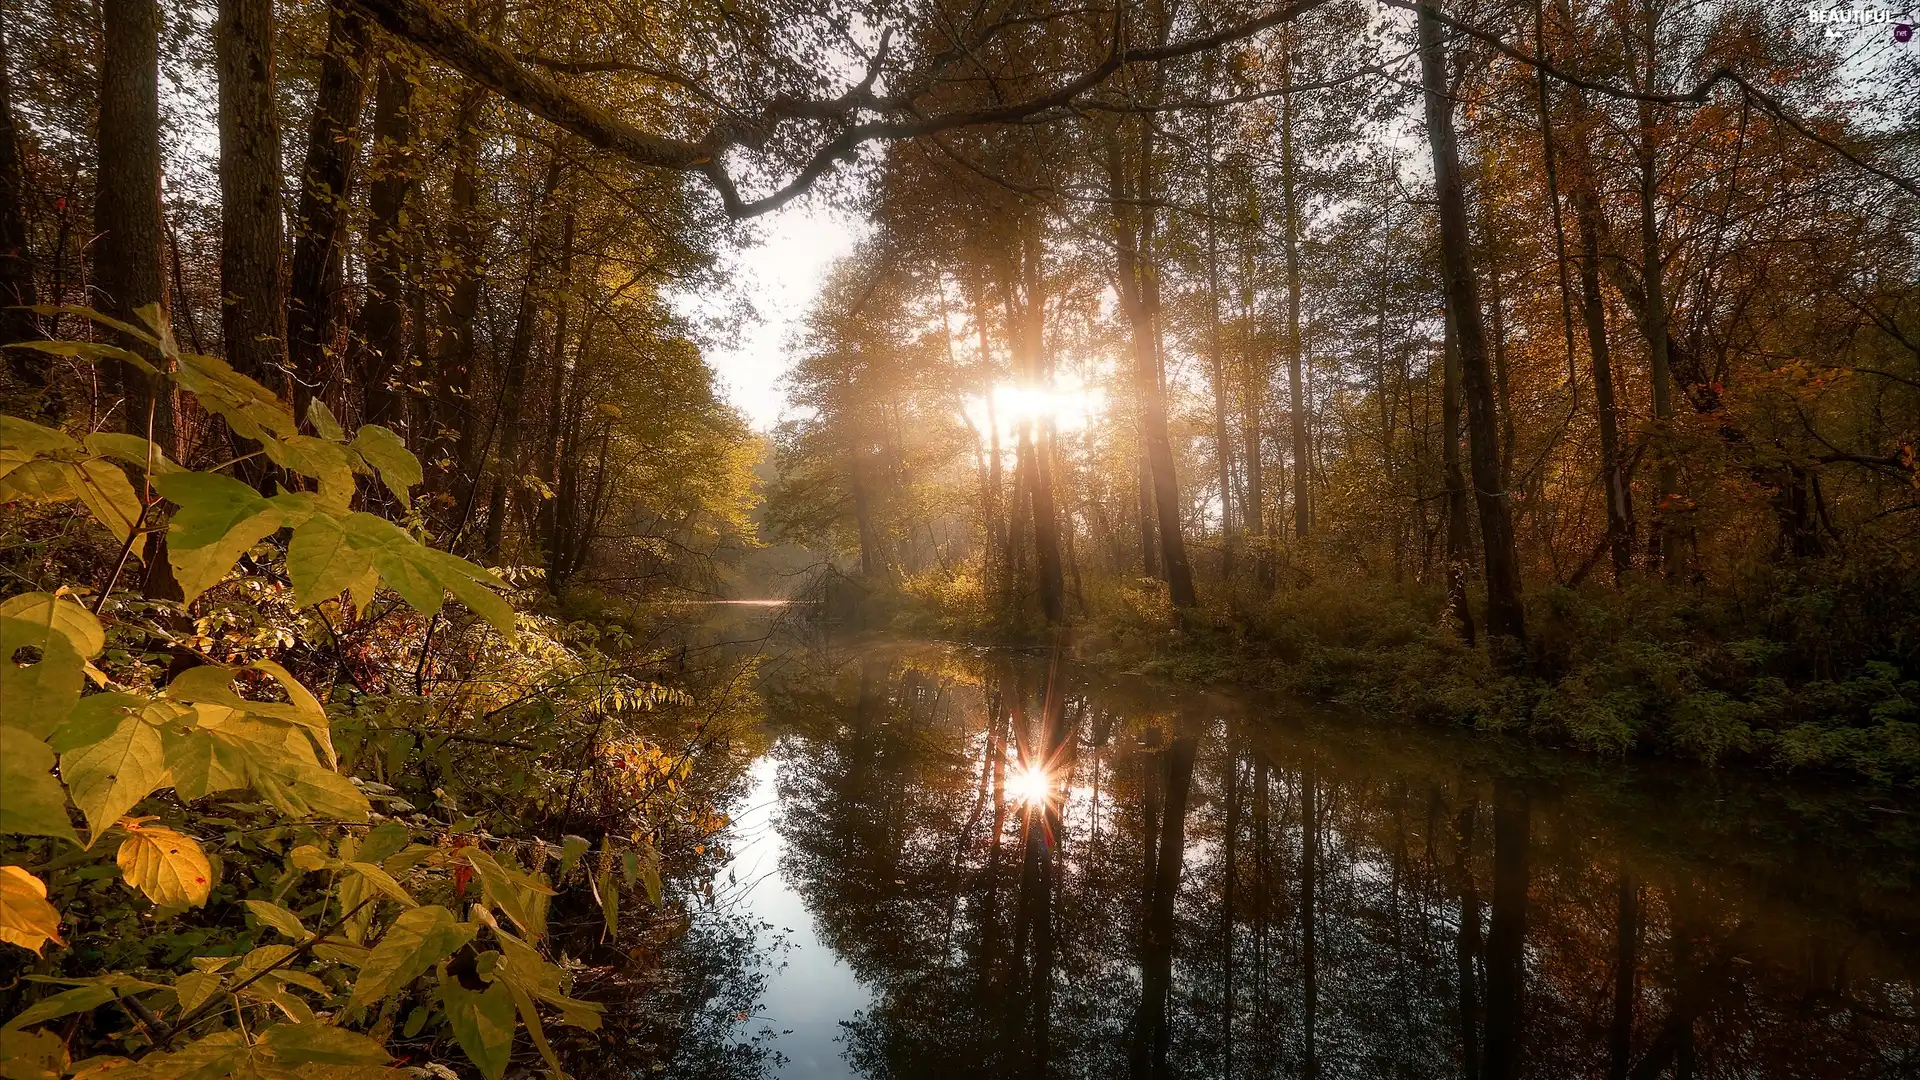 River, trees, Plants, viewes, forest, light breaking through sky, reflection